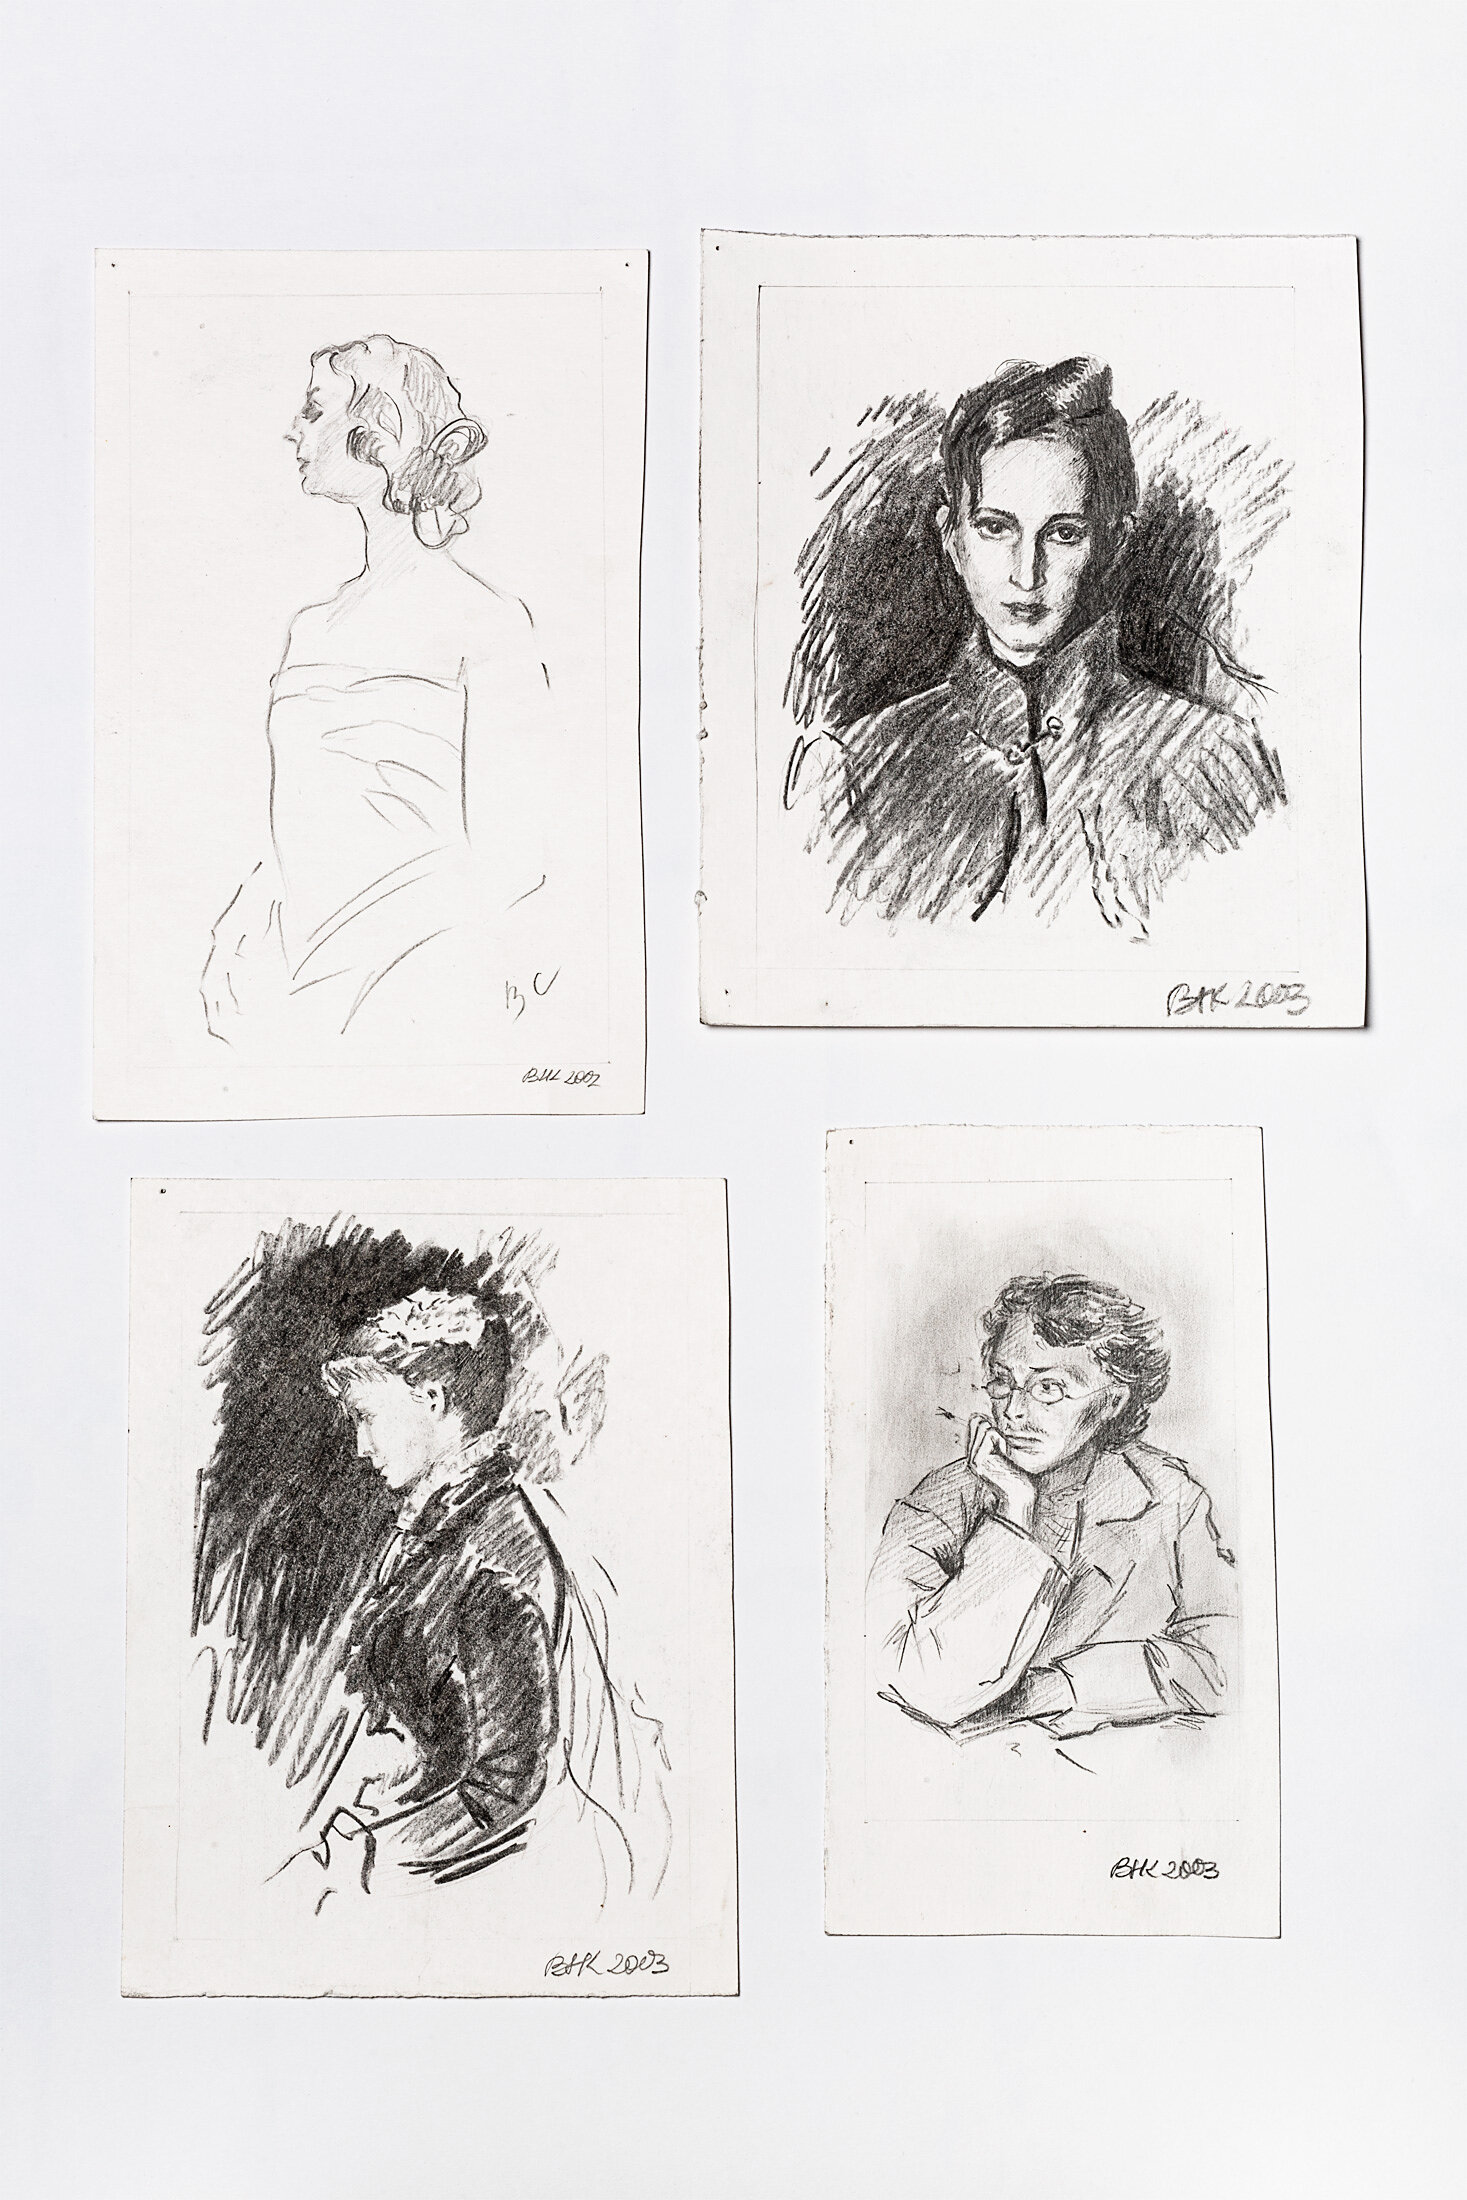 Little Portrait Studies (after 19th century Russian artists), 2002-2003 - graphite pencil and charcoal on paper